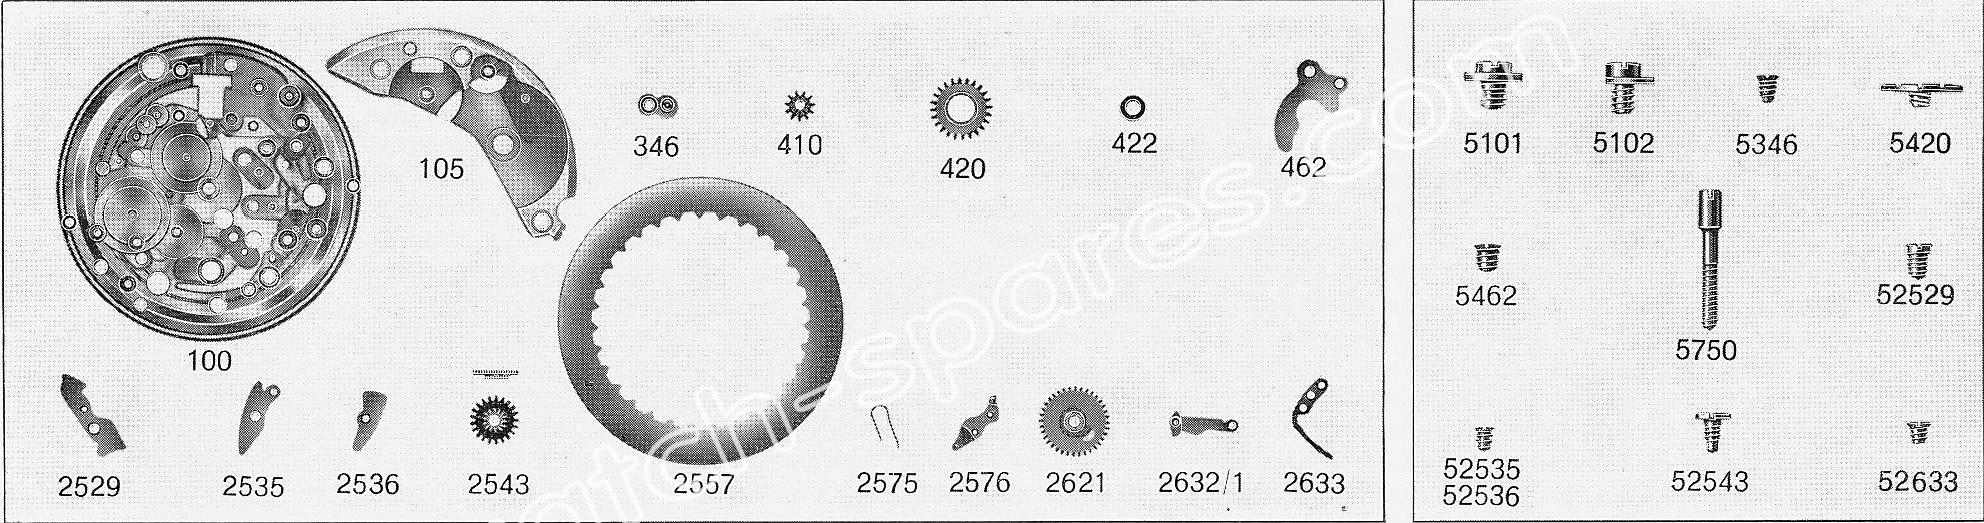 FHF Font 725.9 watch date spare parts